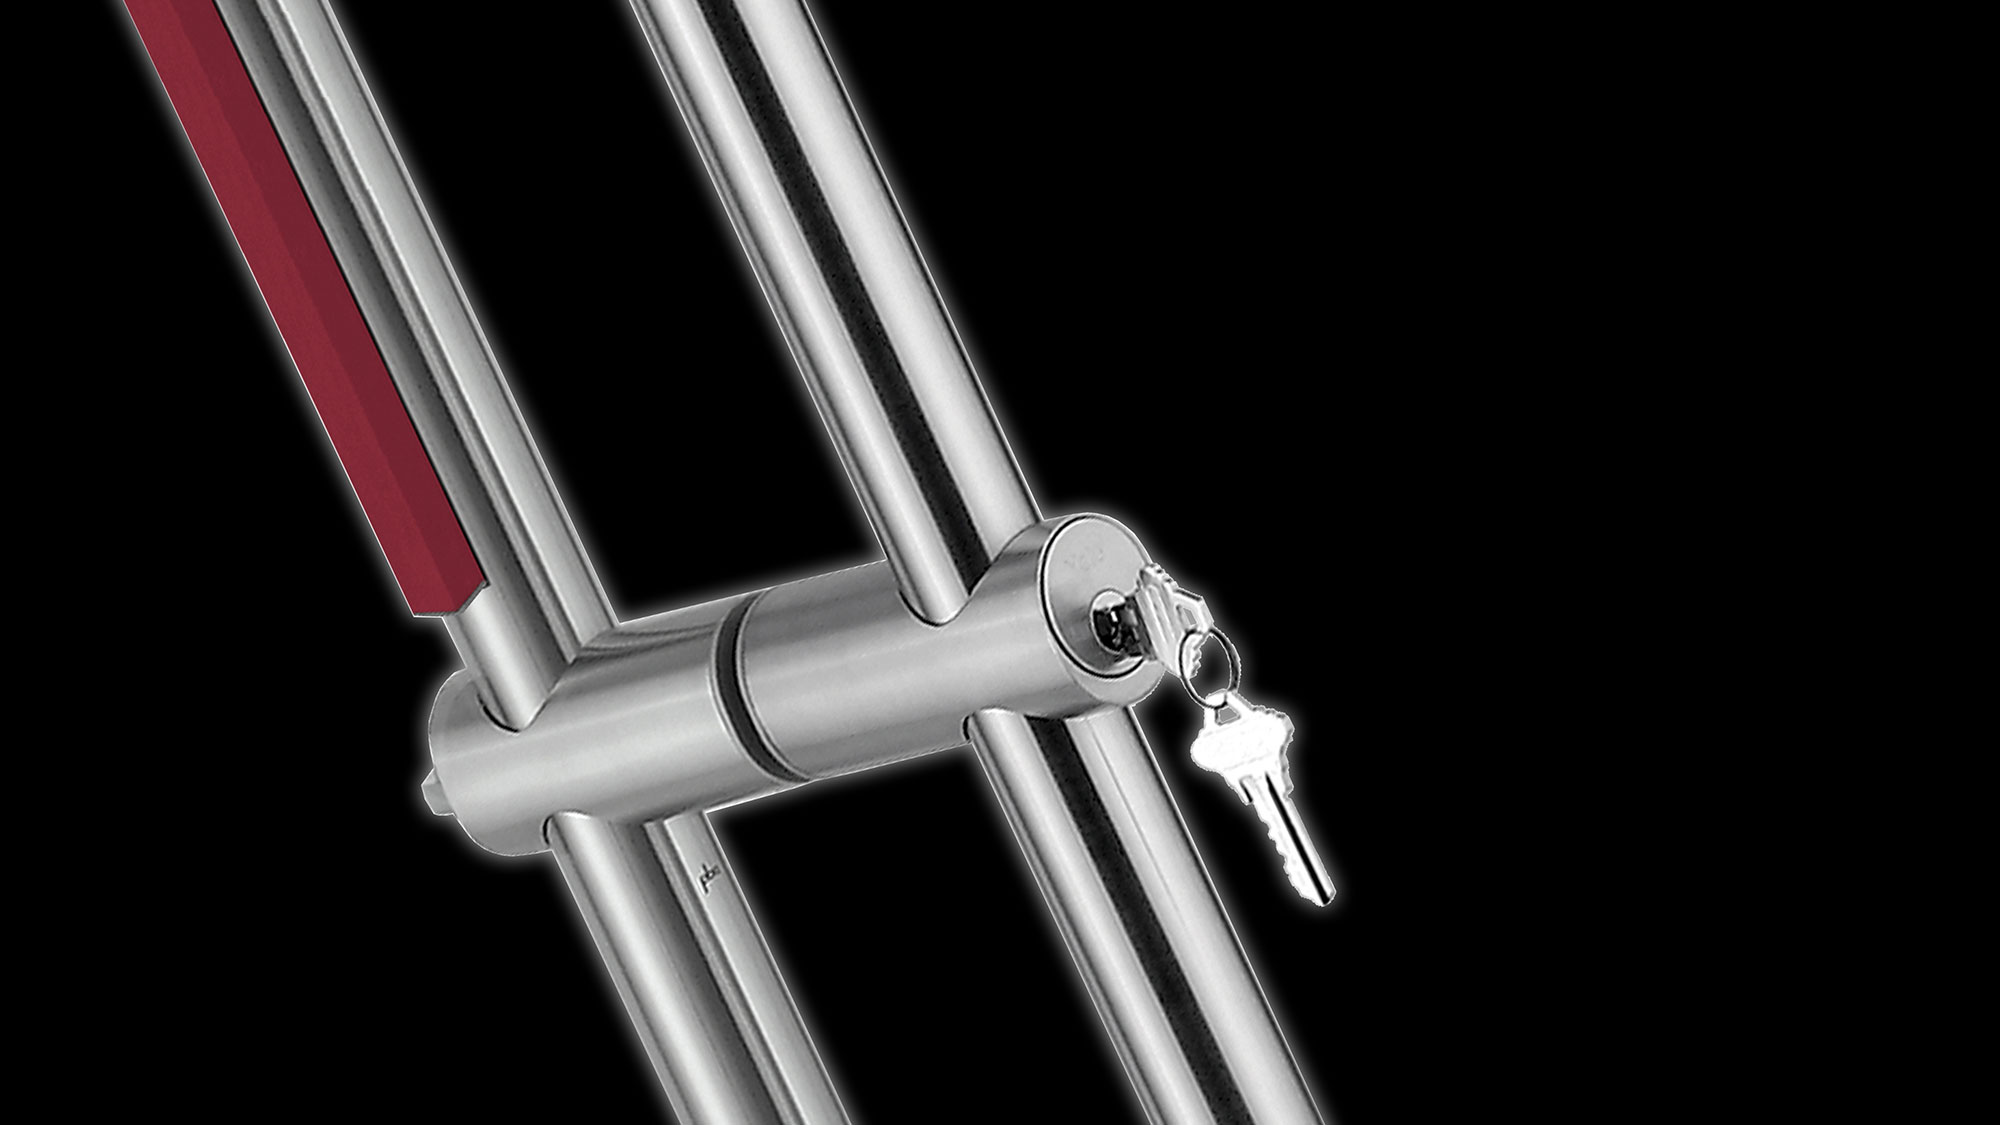 A close up view of a single motion unlocking door pull